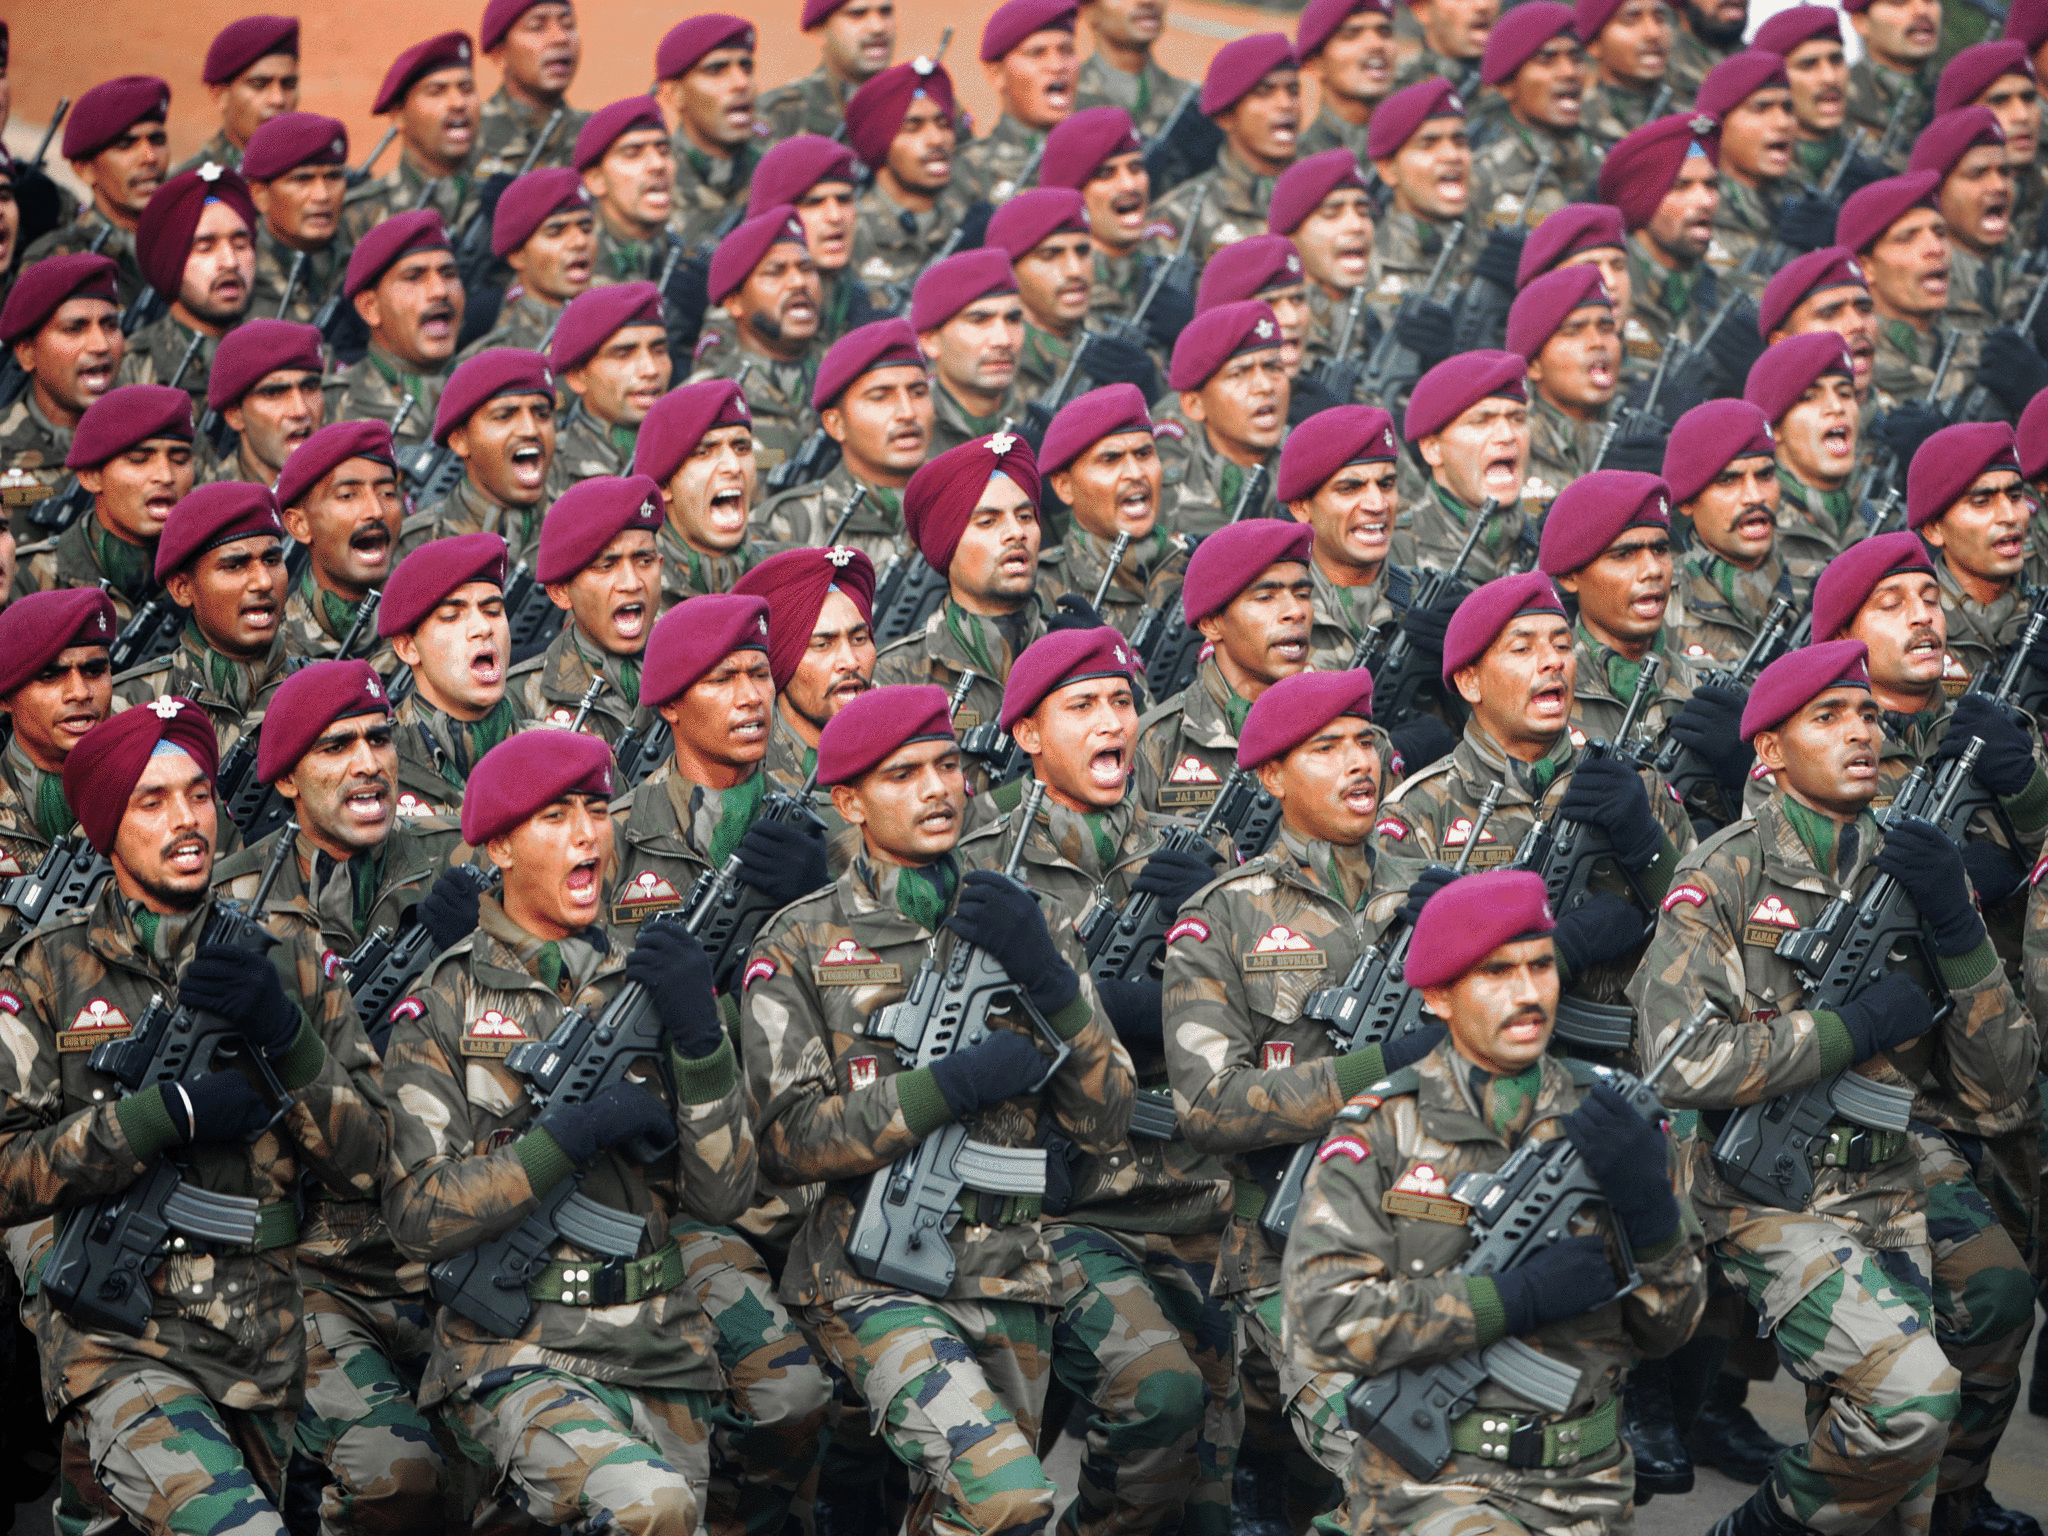 A parachute regiment of the Indian Army marches in formation during the Republic Day parade in New Delhi on January 26, 2014.